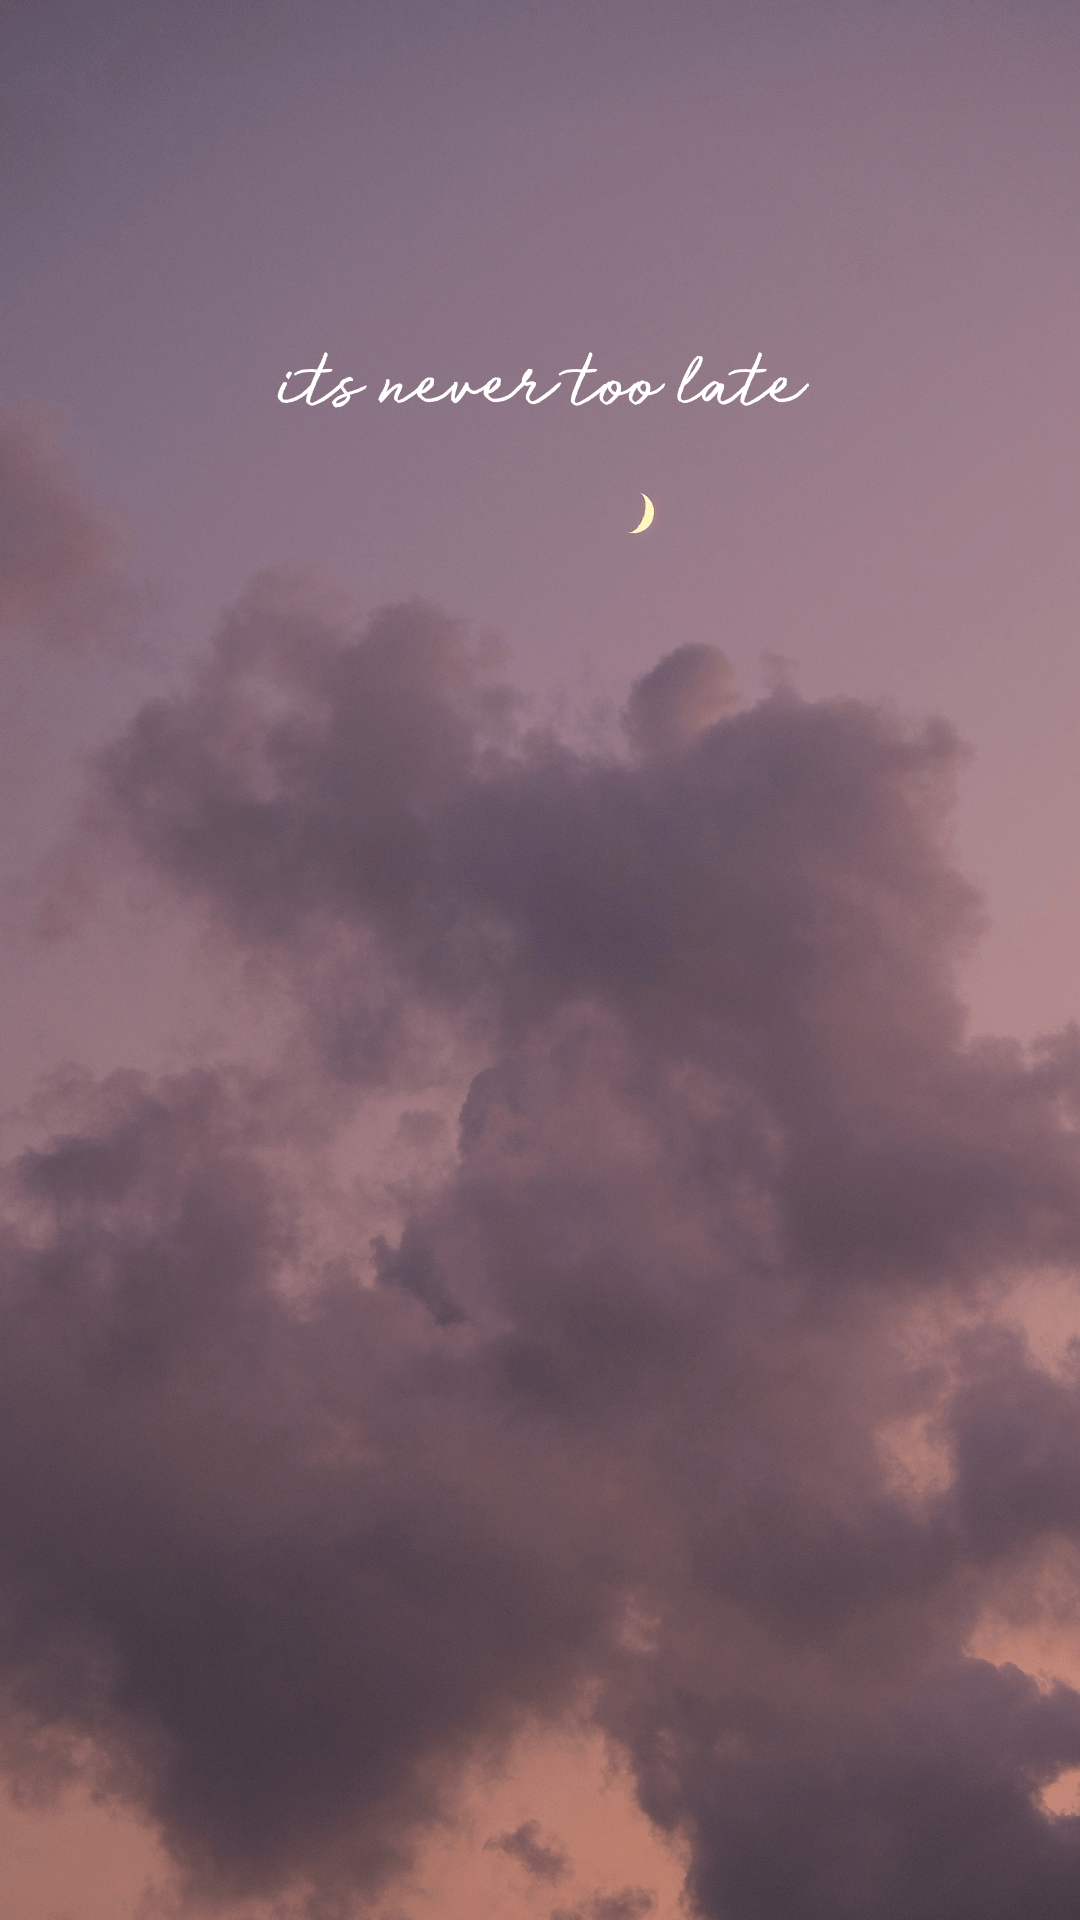 Clouds in a purple sky with the moon and the words 